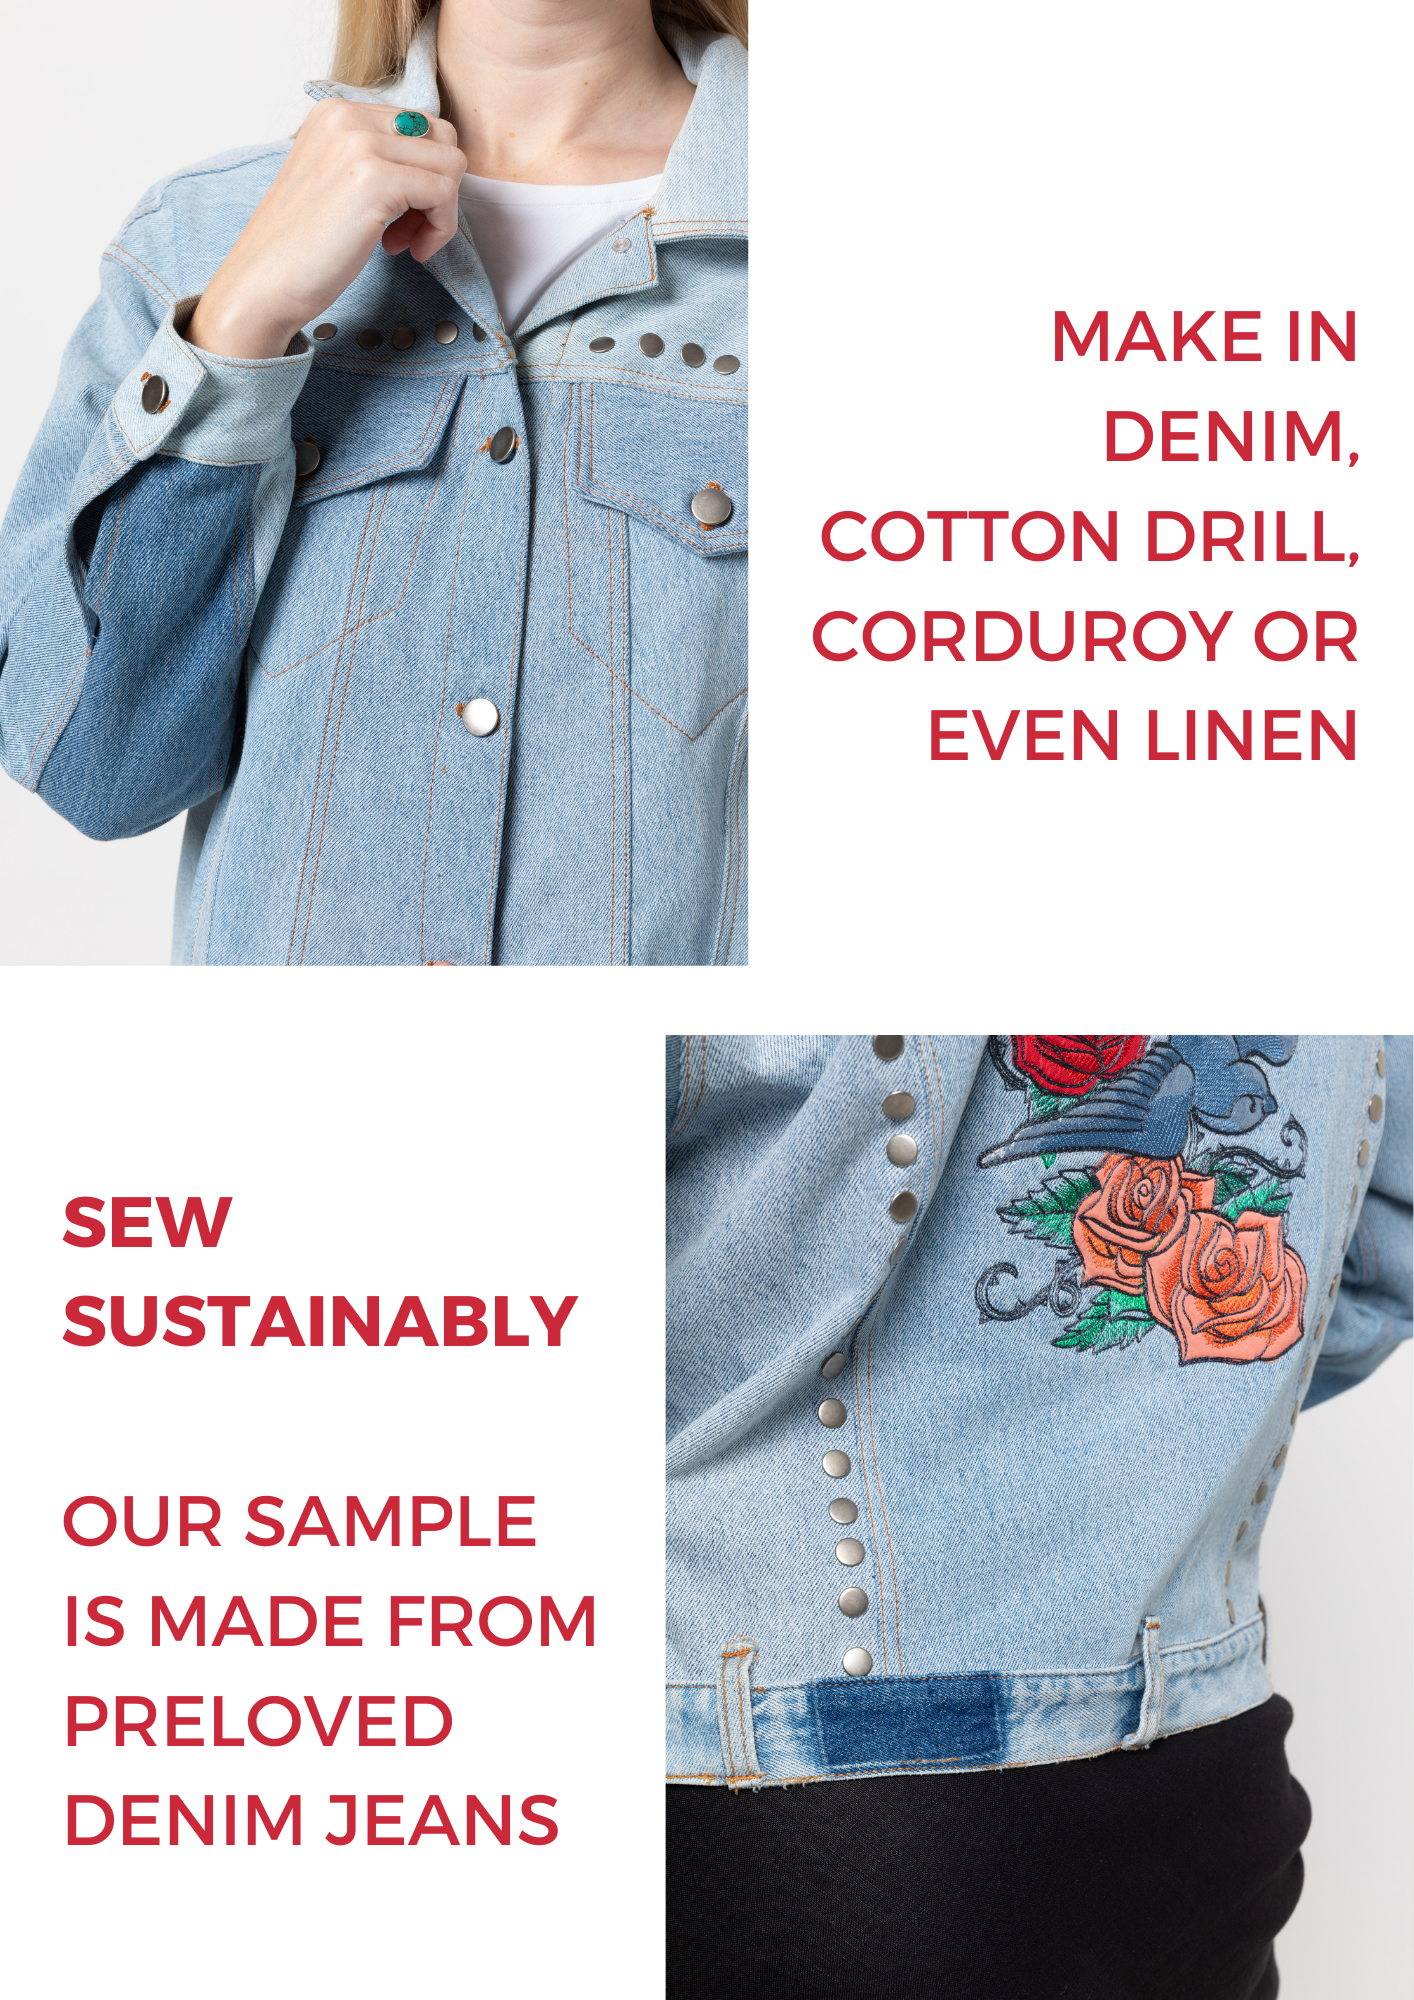 Sew Sustainably - Upcycle fabric or existing garments